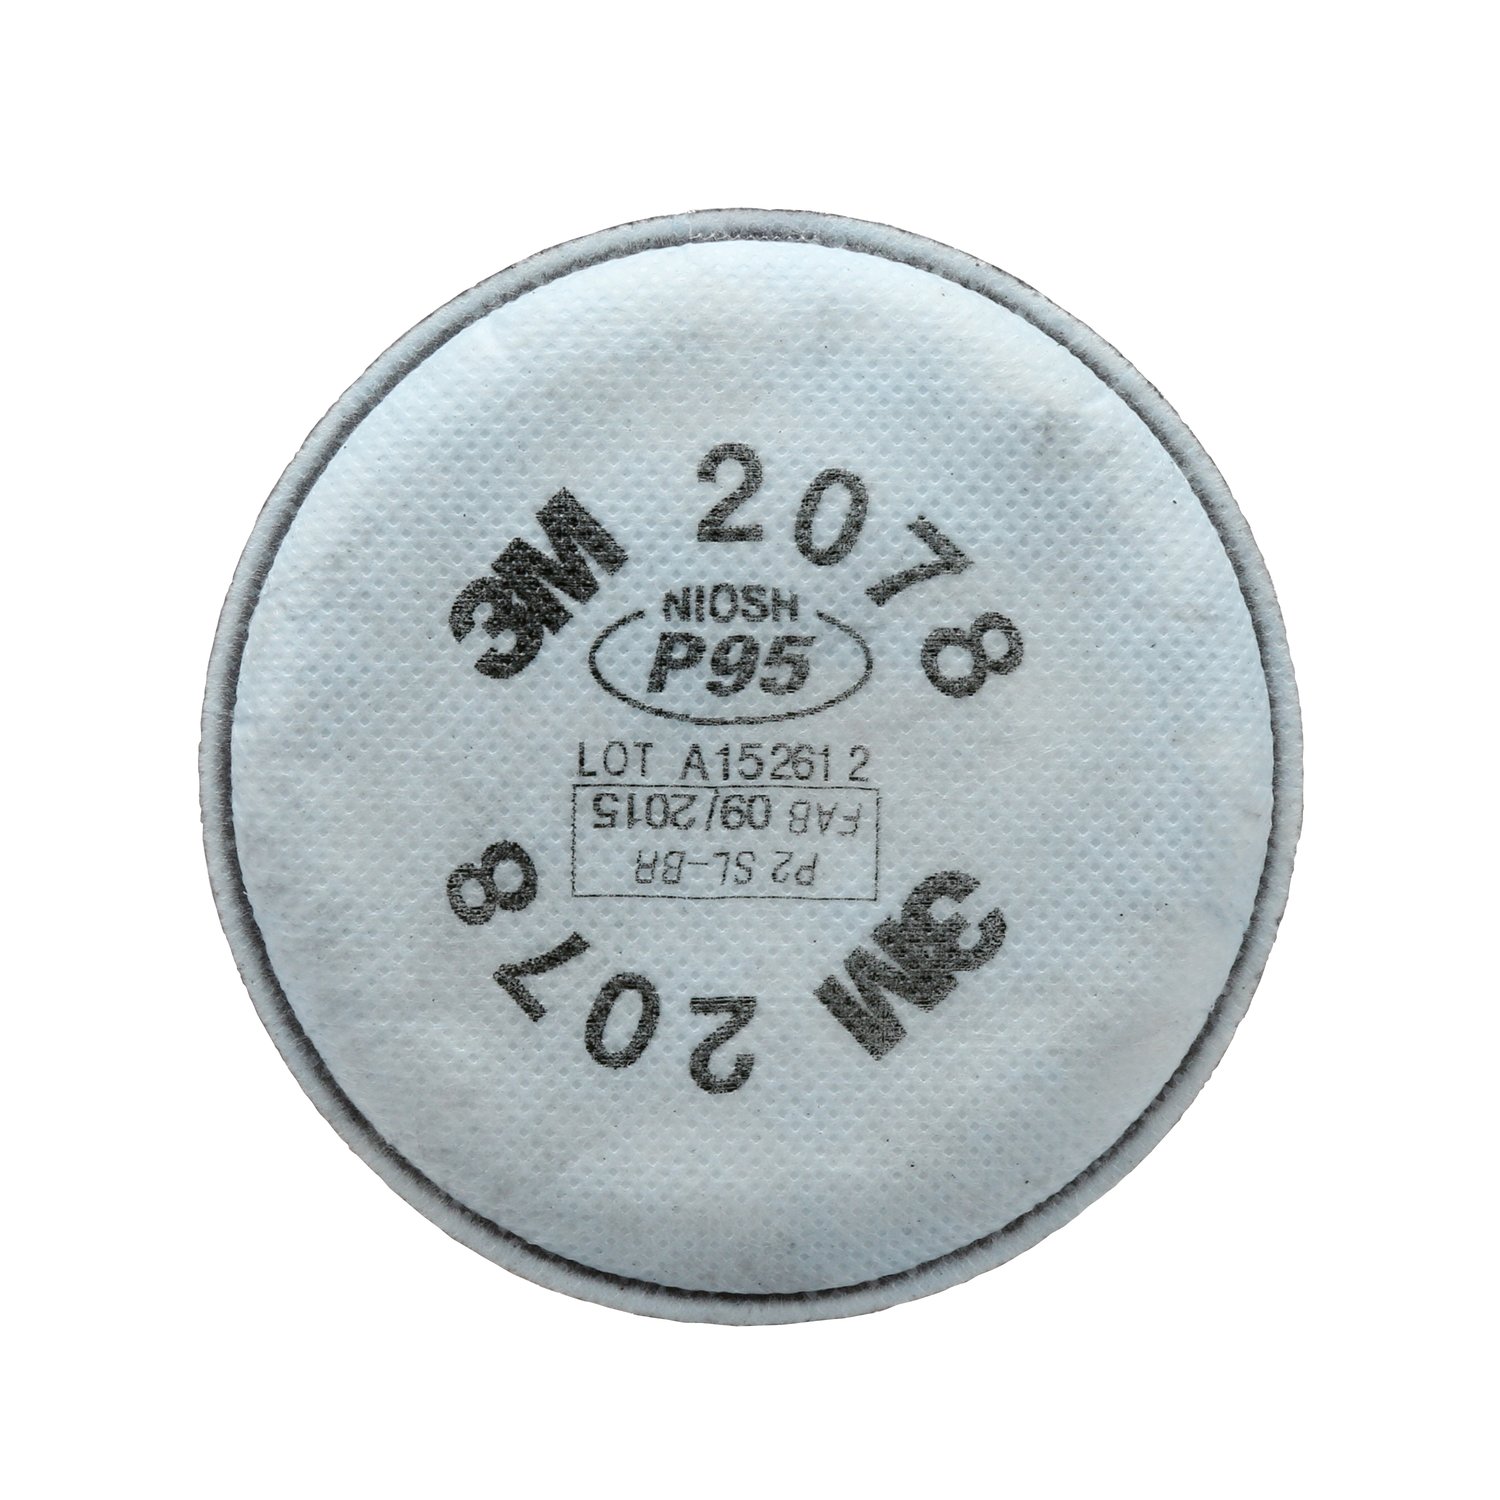 7000052066 - 3M Particulate Filter 2078, P95, with Nuisance Level Organic Vapor/Acid
Gas Relief 100 EA/Case